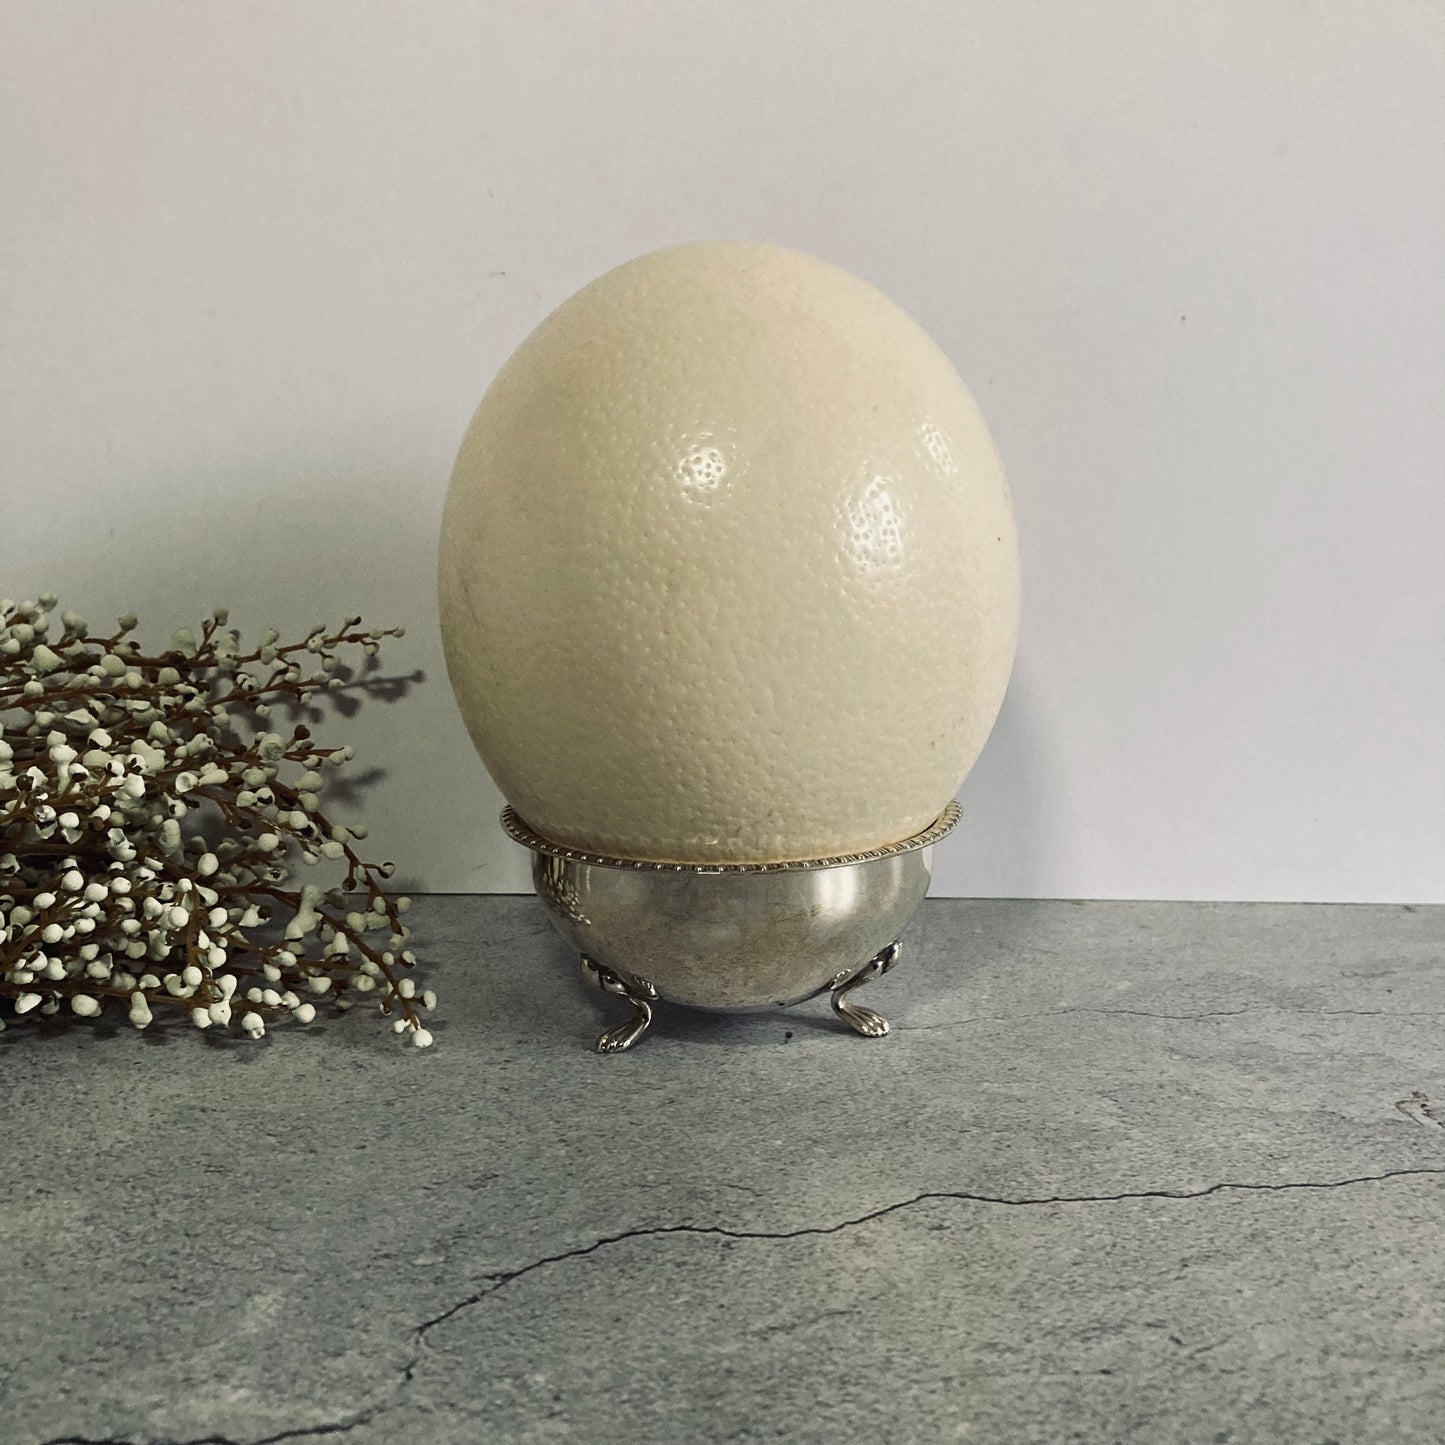 The Director Shelly - Luxury Antique Ostrich Egg and Cup